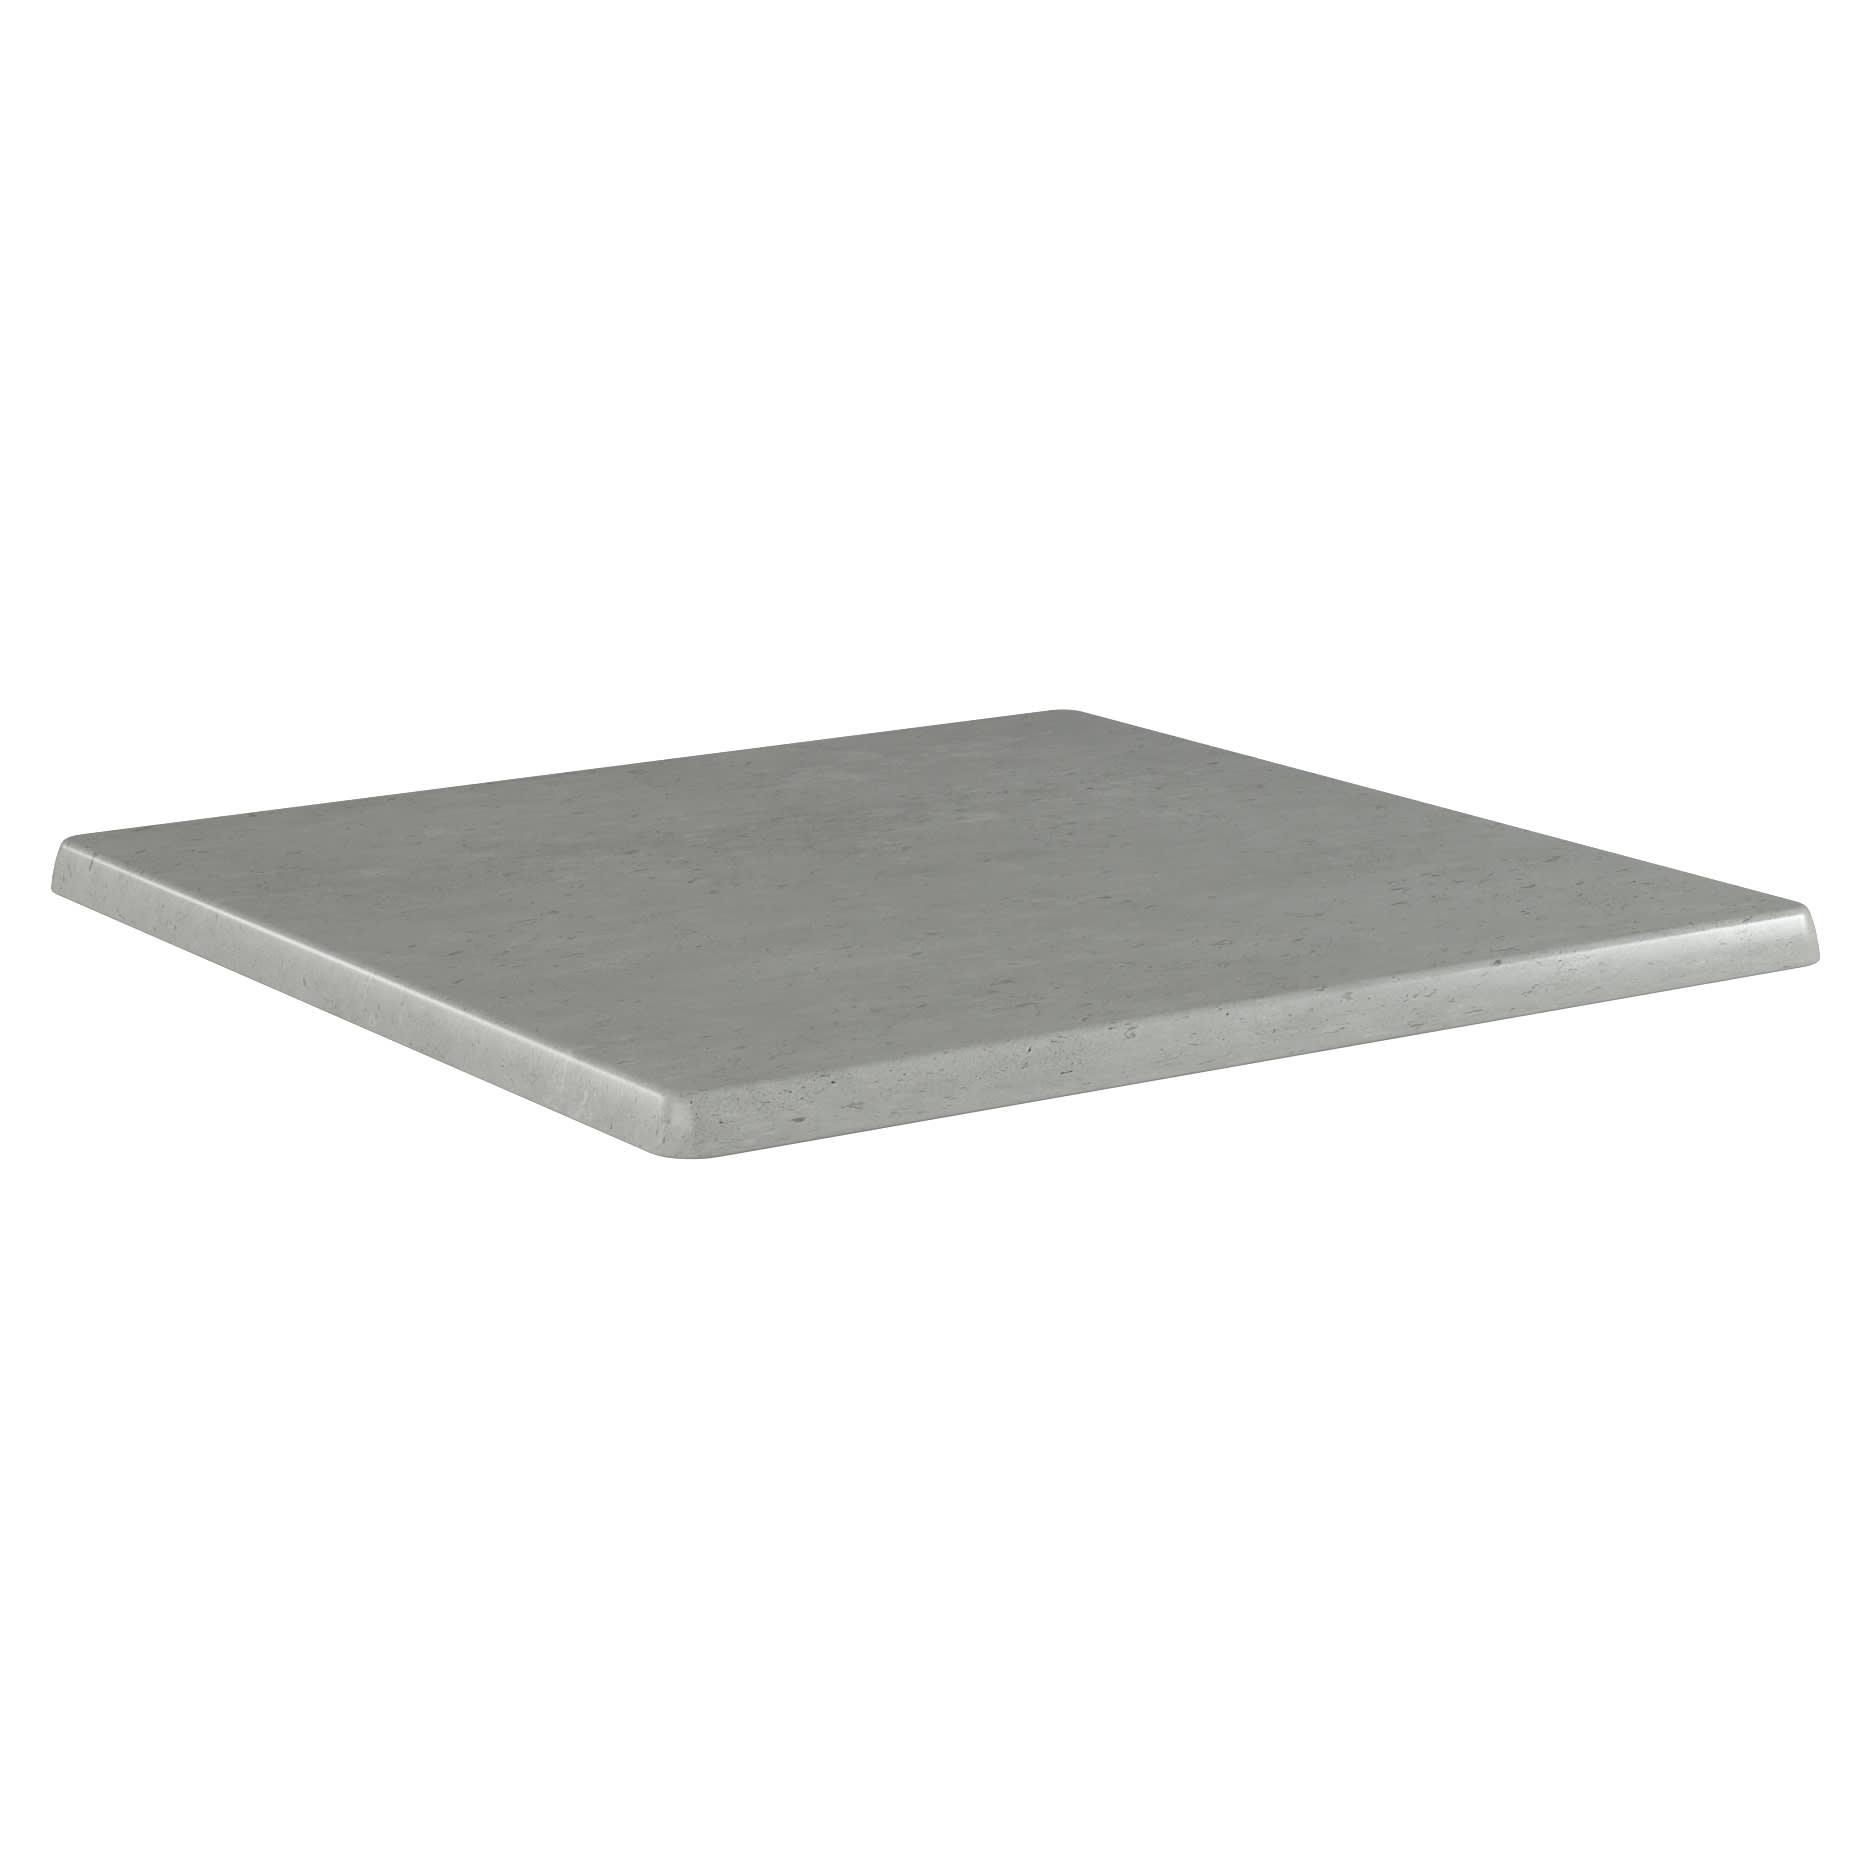 Outdoor Resin Table Top in Industrial Grey Finish with Outdoor Resin Table Top in Industrial Grey Finish